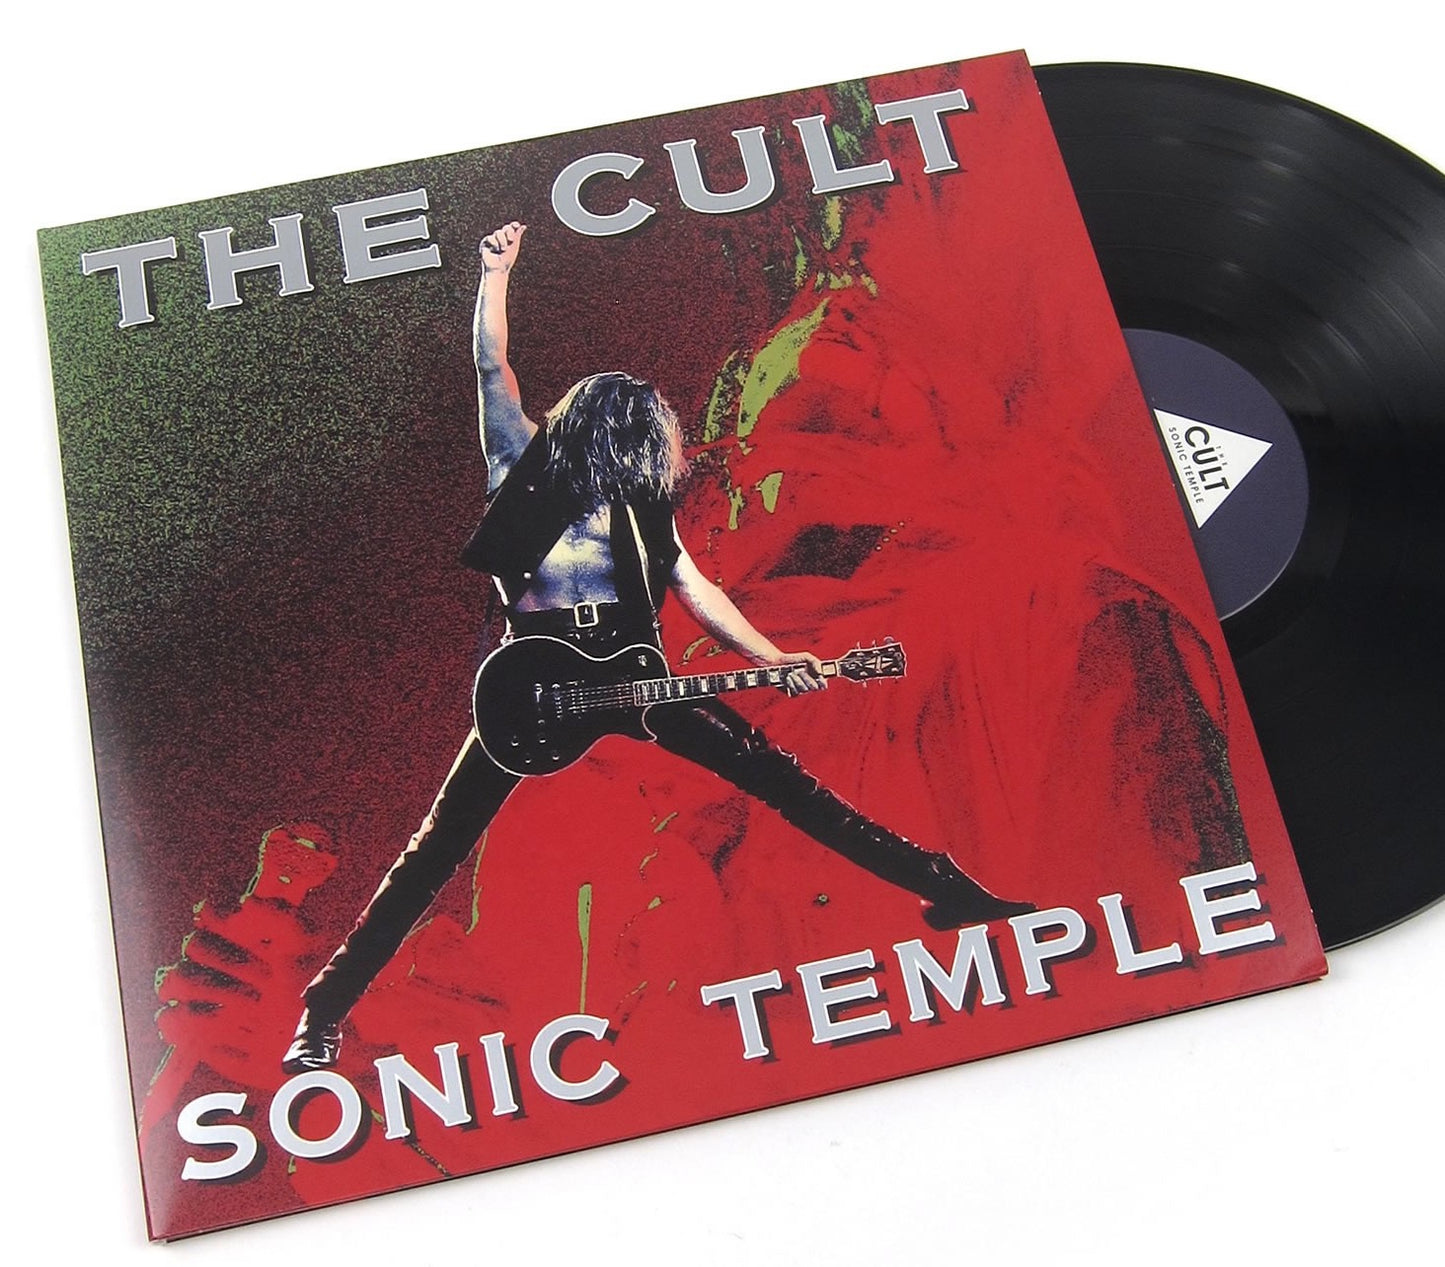 NEW - Cult (The), Sonic Temple 30th Anniversary 2LP